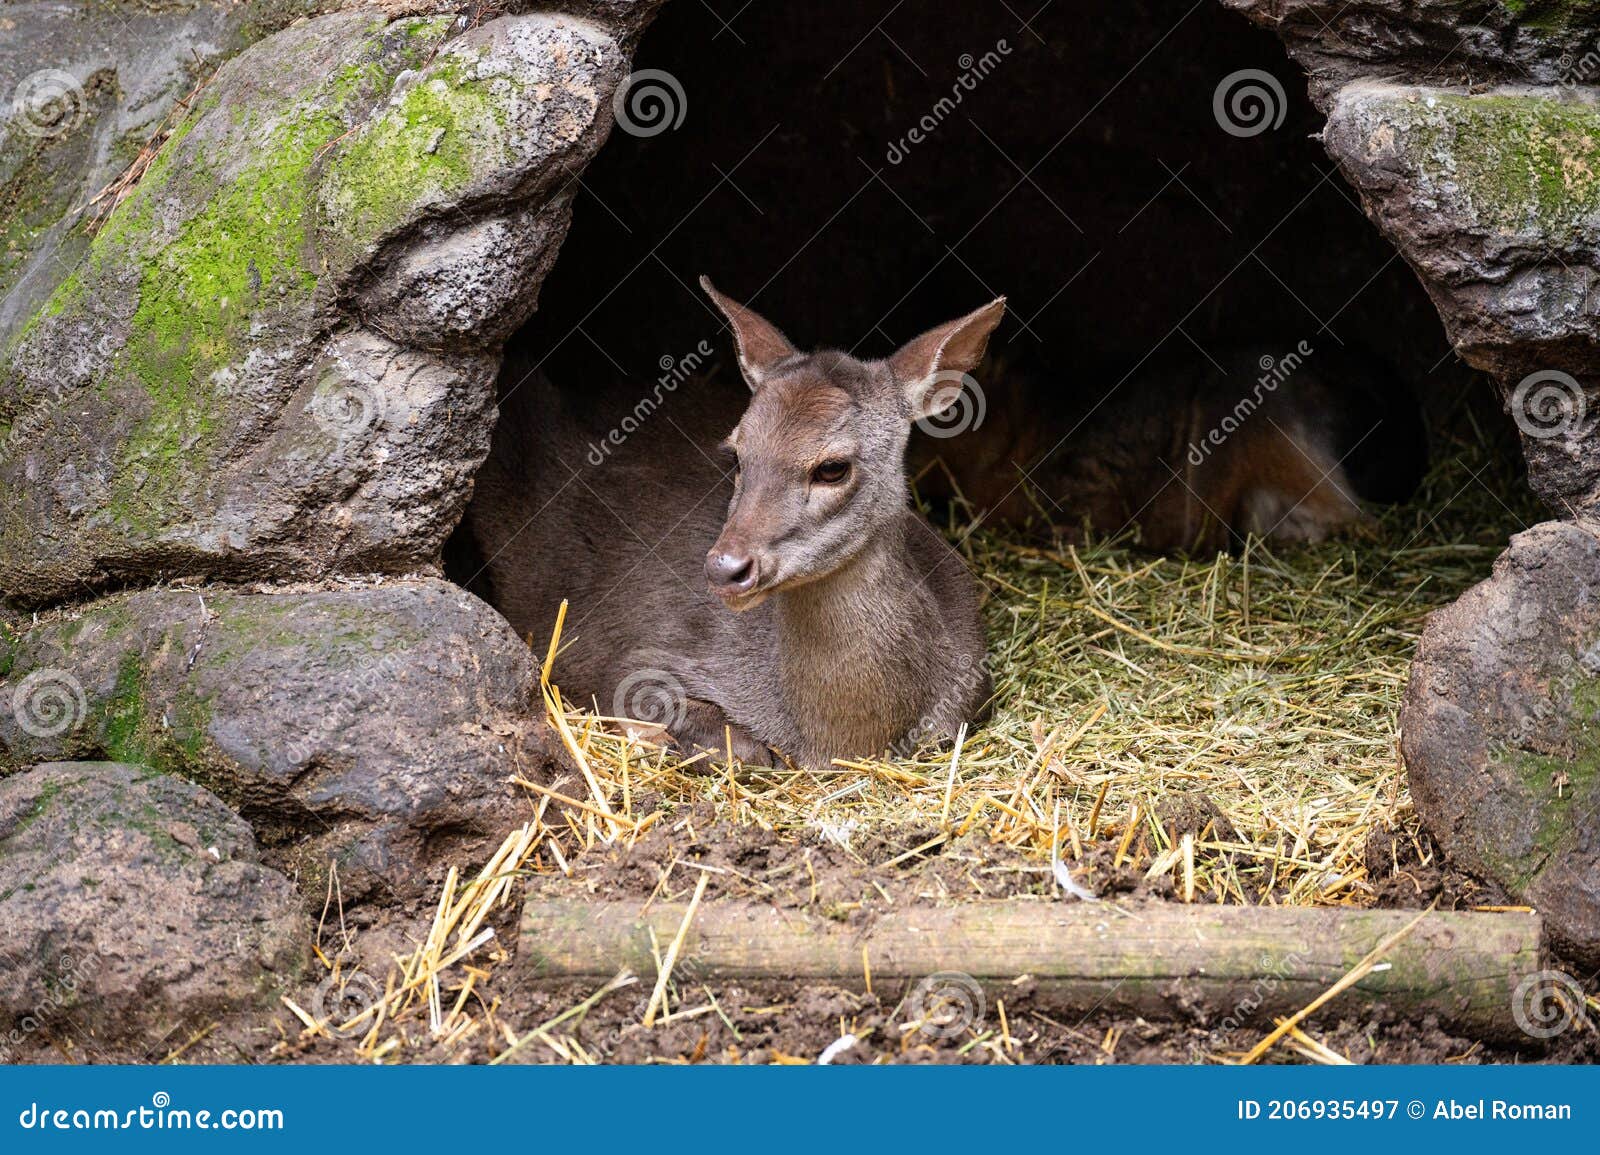 mazama, deer from the forests of south america